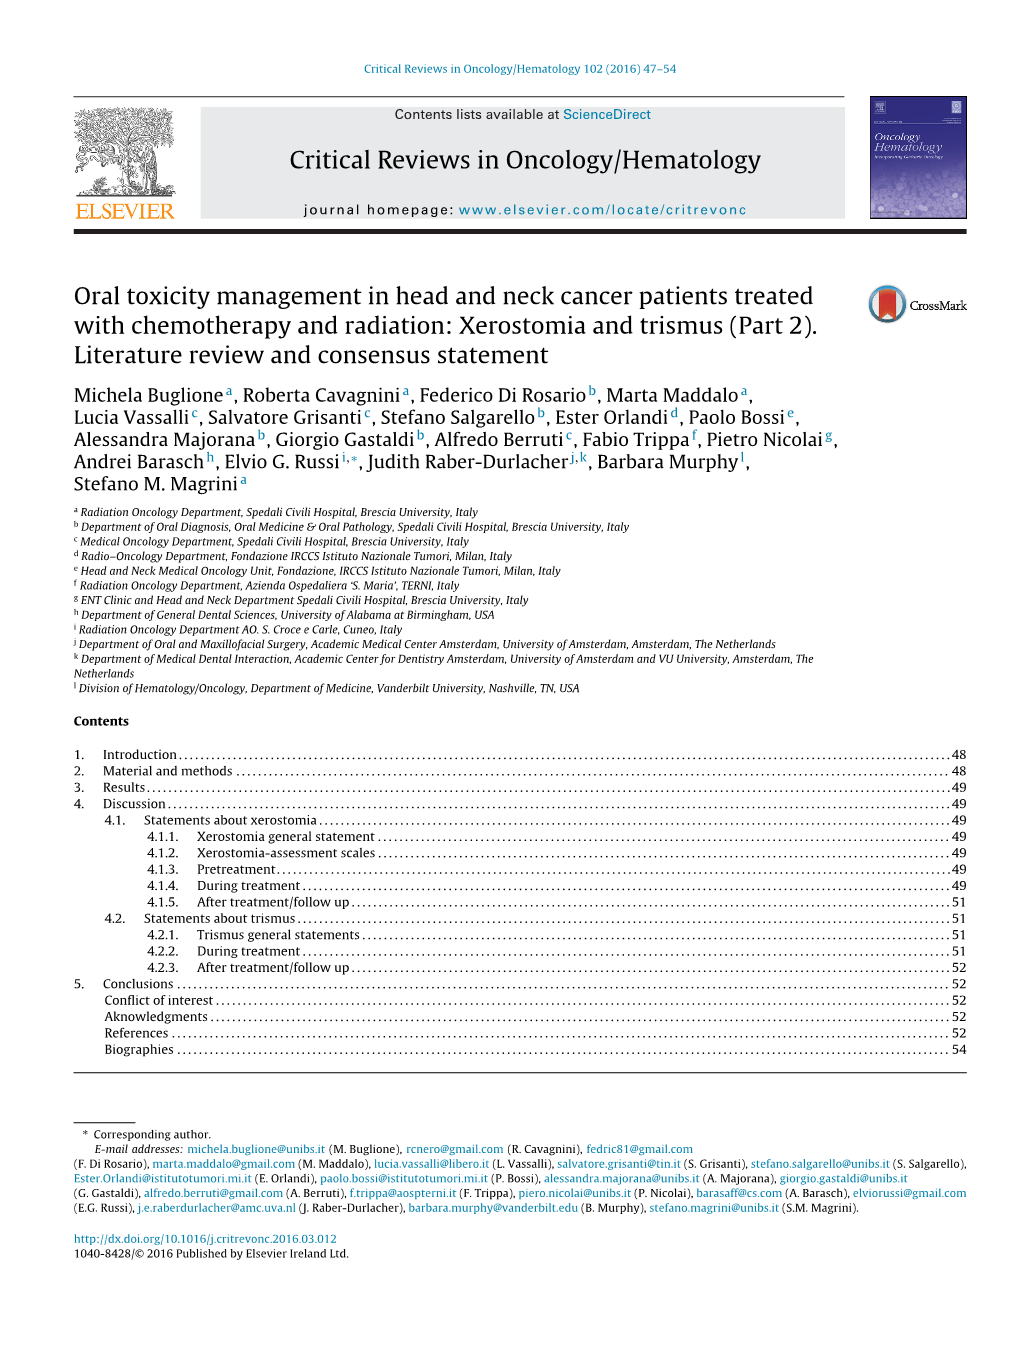 Oral Toxicity Management in Head and Neck Cancer Patients Treated with Chemotherapy and Radiation: Xerostomia and Trismus (Part